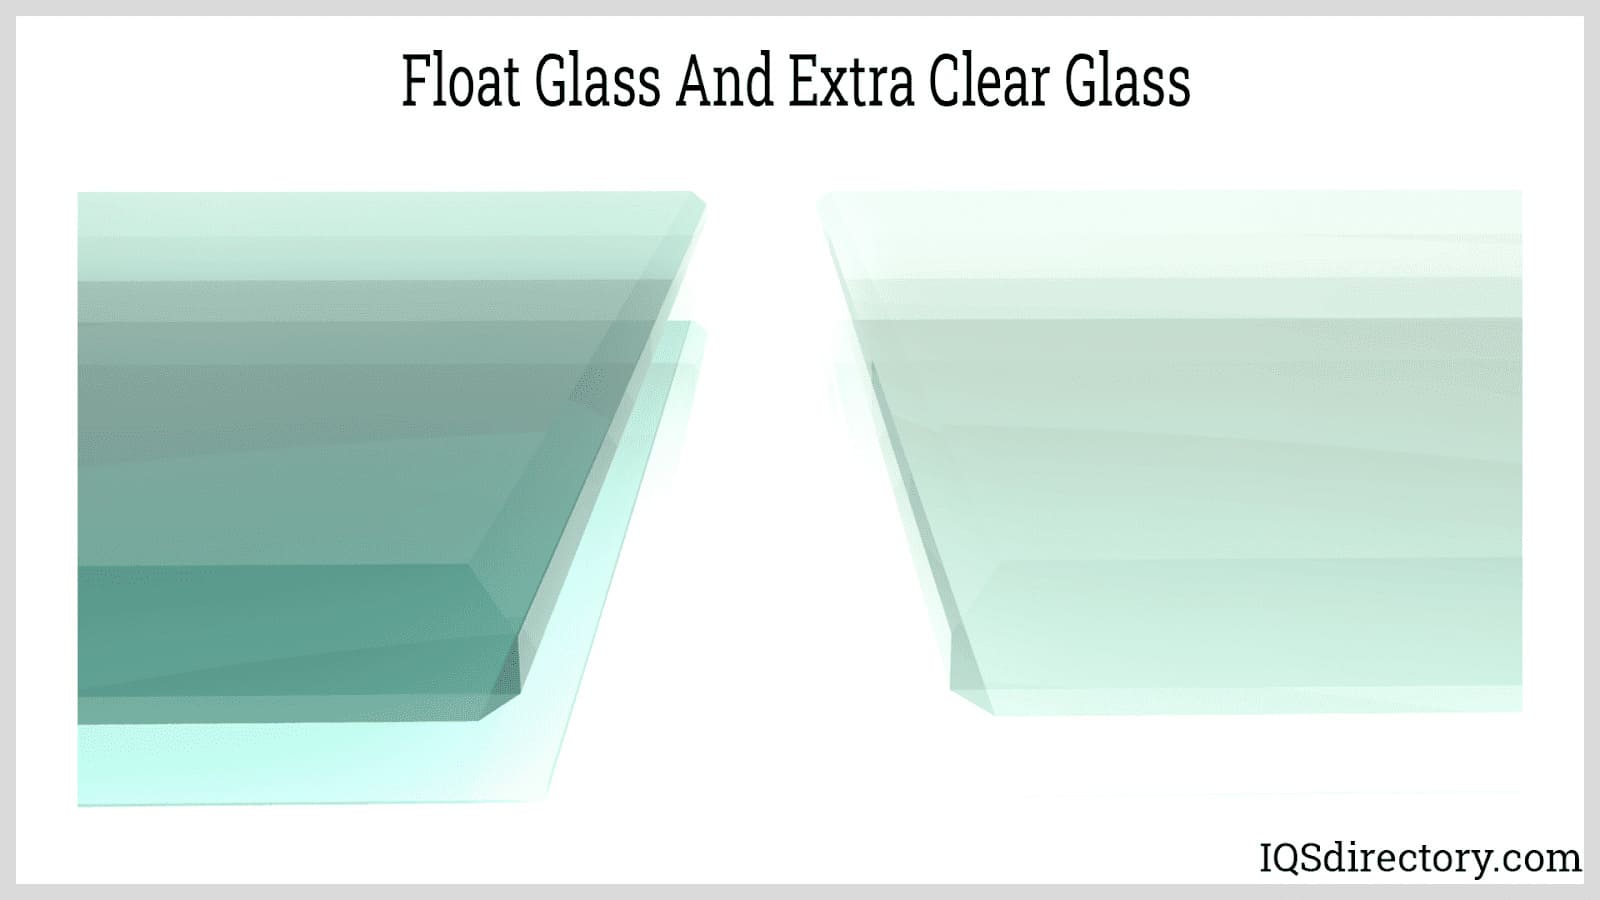 Float Glass and Extra Clear Glass